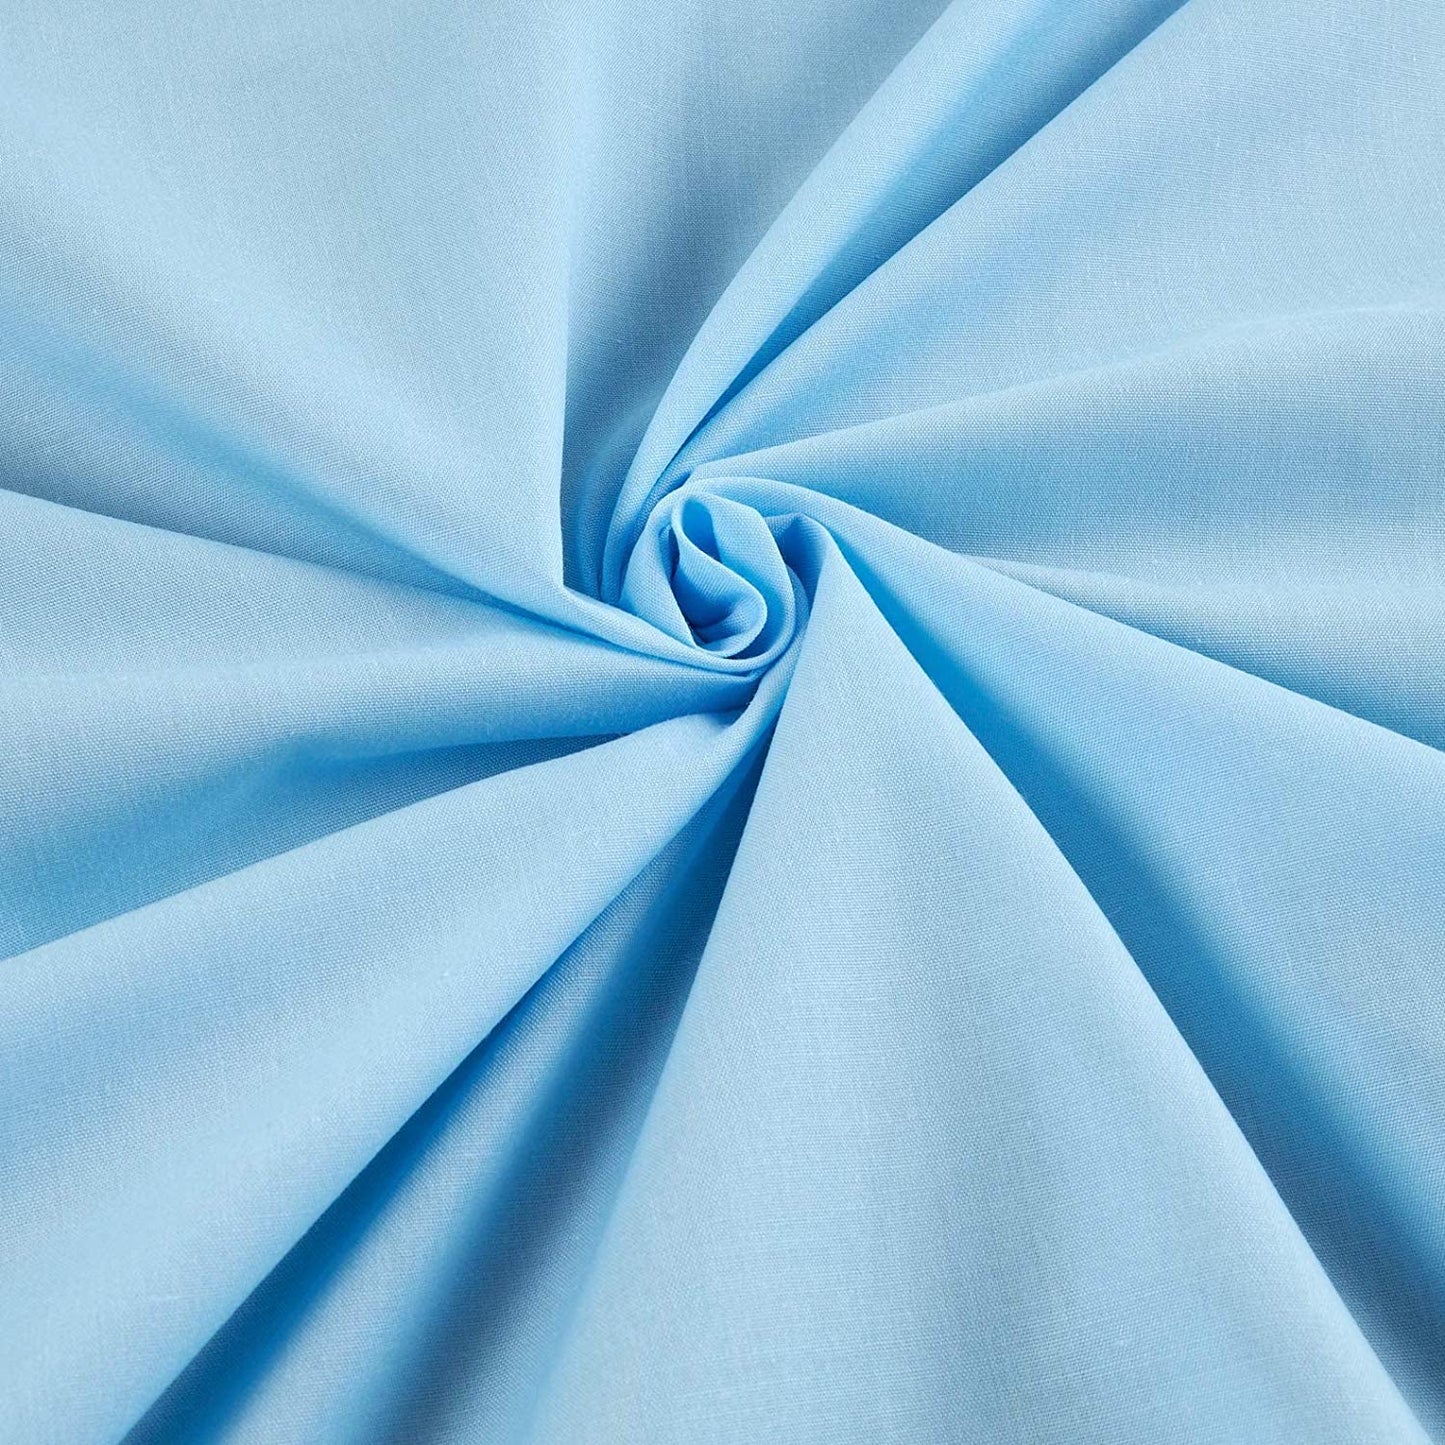 Premium Light Weight Poly Cotton Blend Broadcloth Fabric, Good to Make Face Mask Fabric (Baby Blue, 1 Yard)